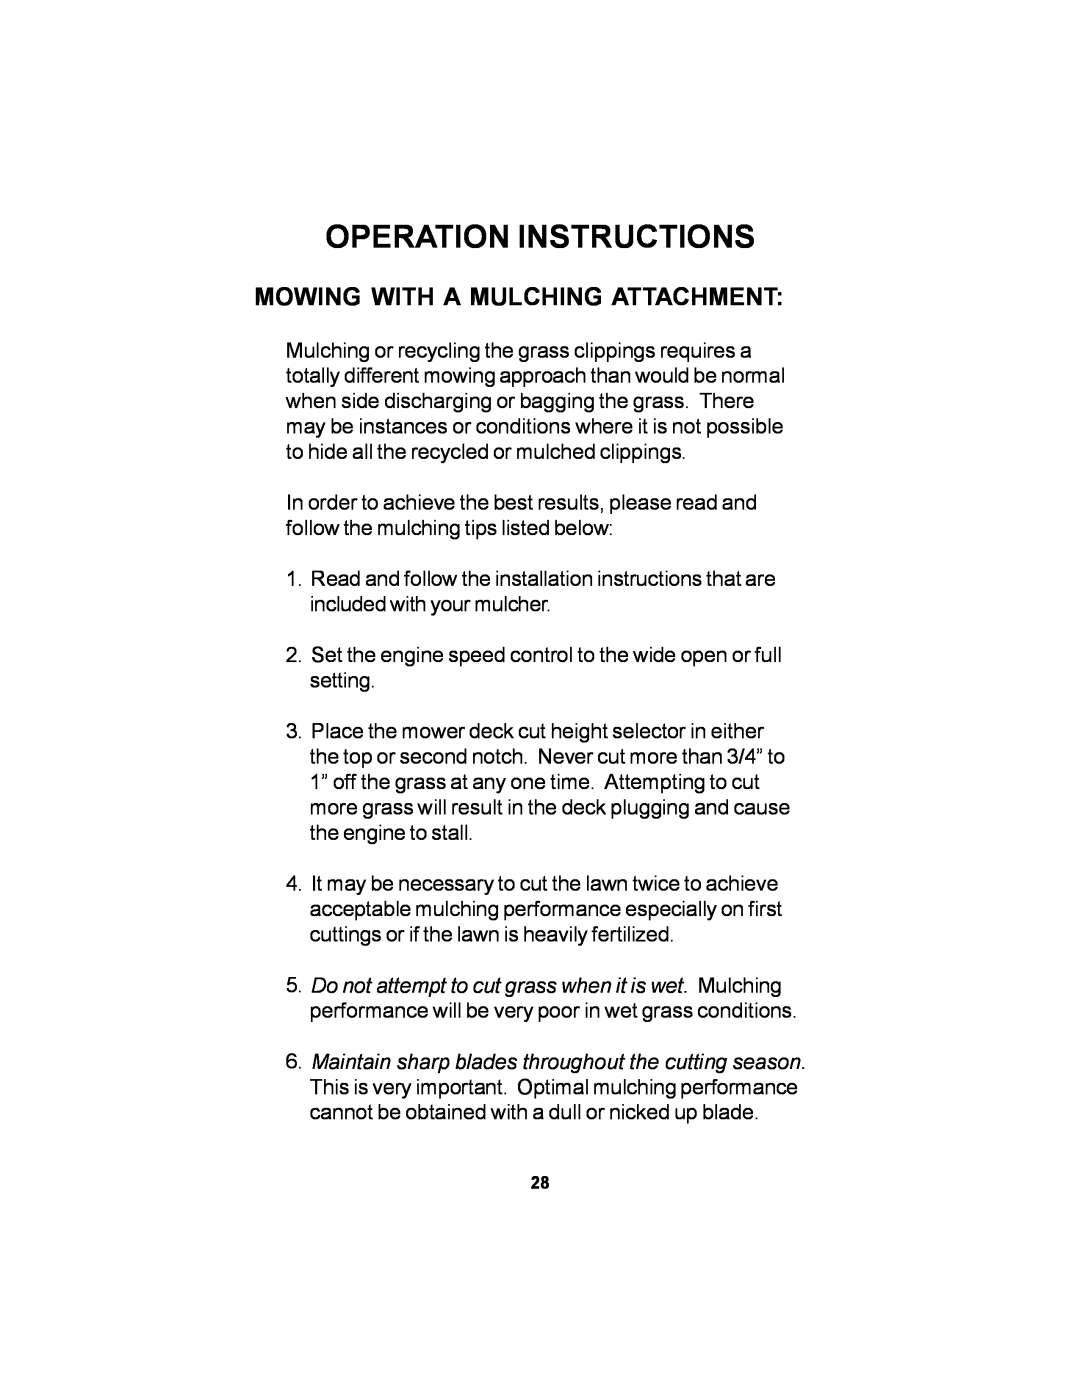 Dixon 12881-106 manual Mowing With A Mulching Attachment, Operation Instructions 